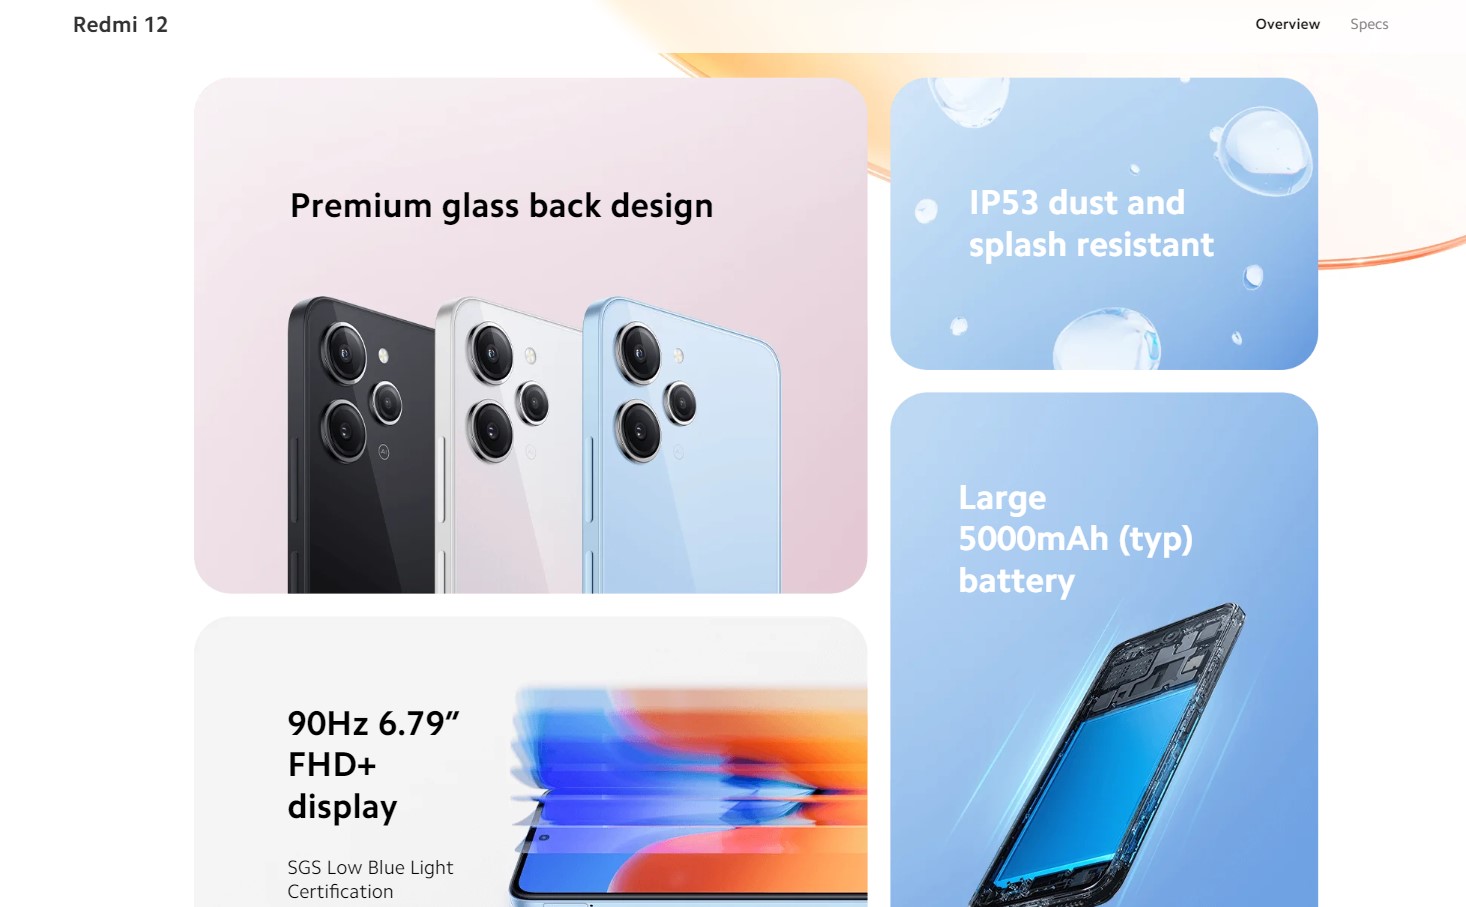 Redmi 12 - A Feature-Packed Global Release with Impressive Display, Camera, and Battery - Tech News India - Tech Updates - Before You Take